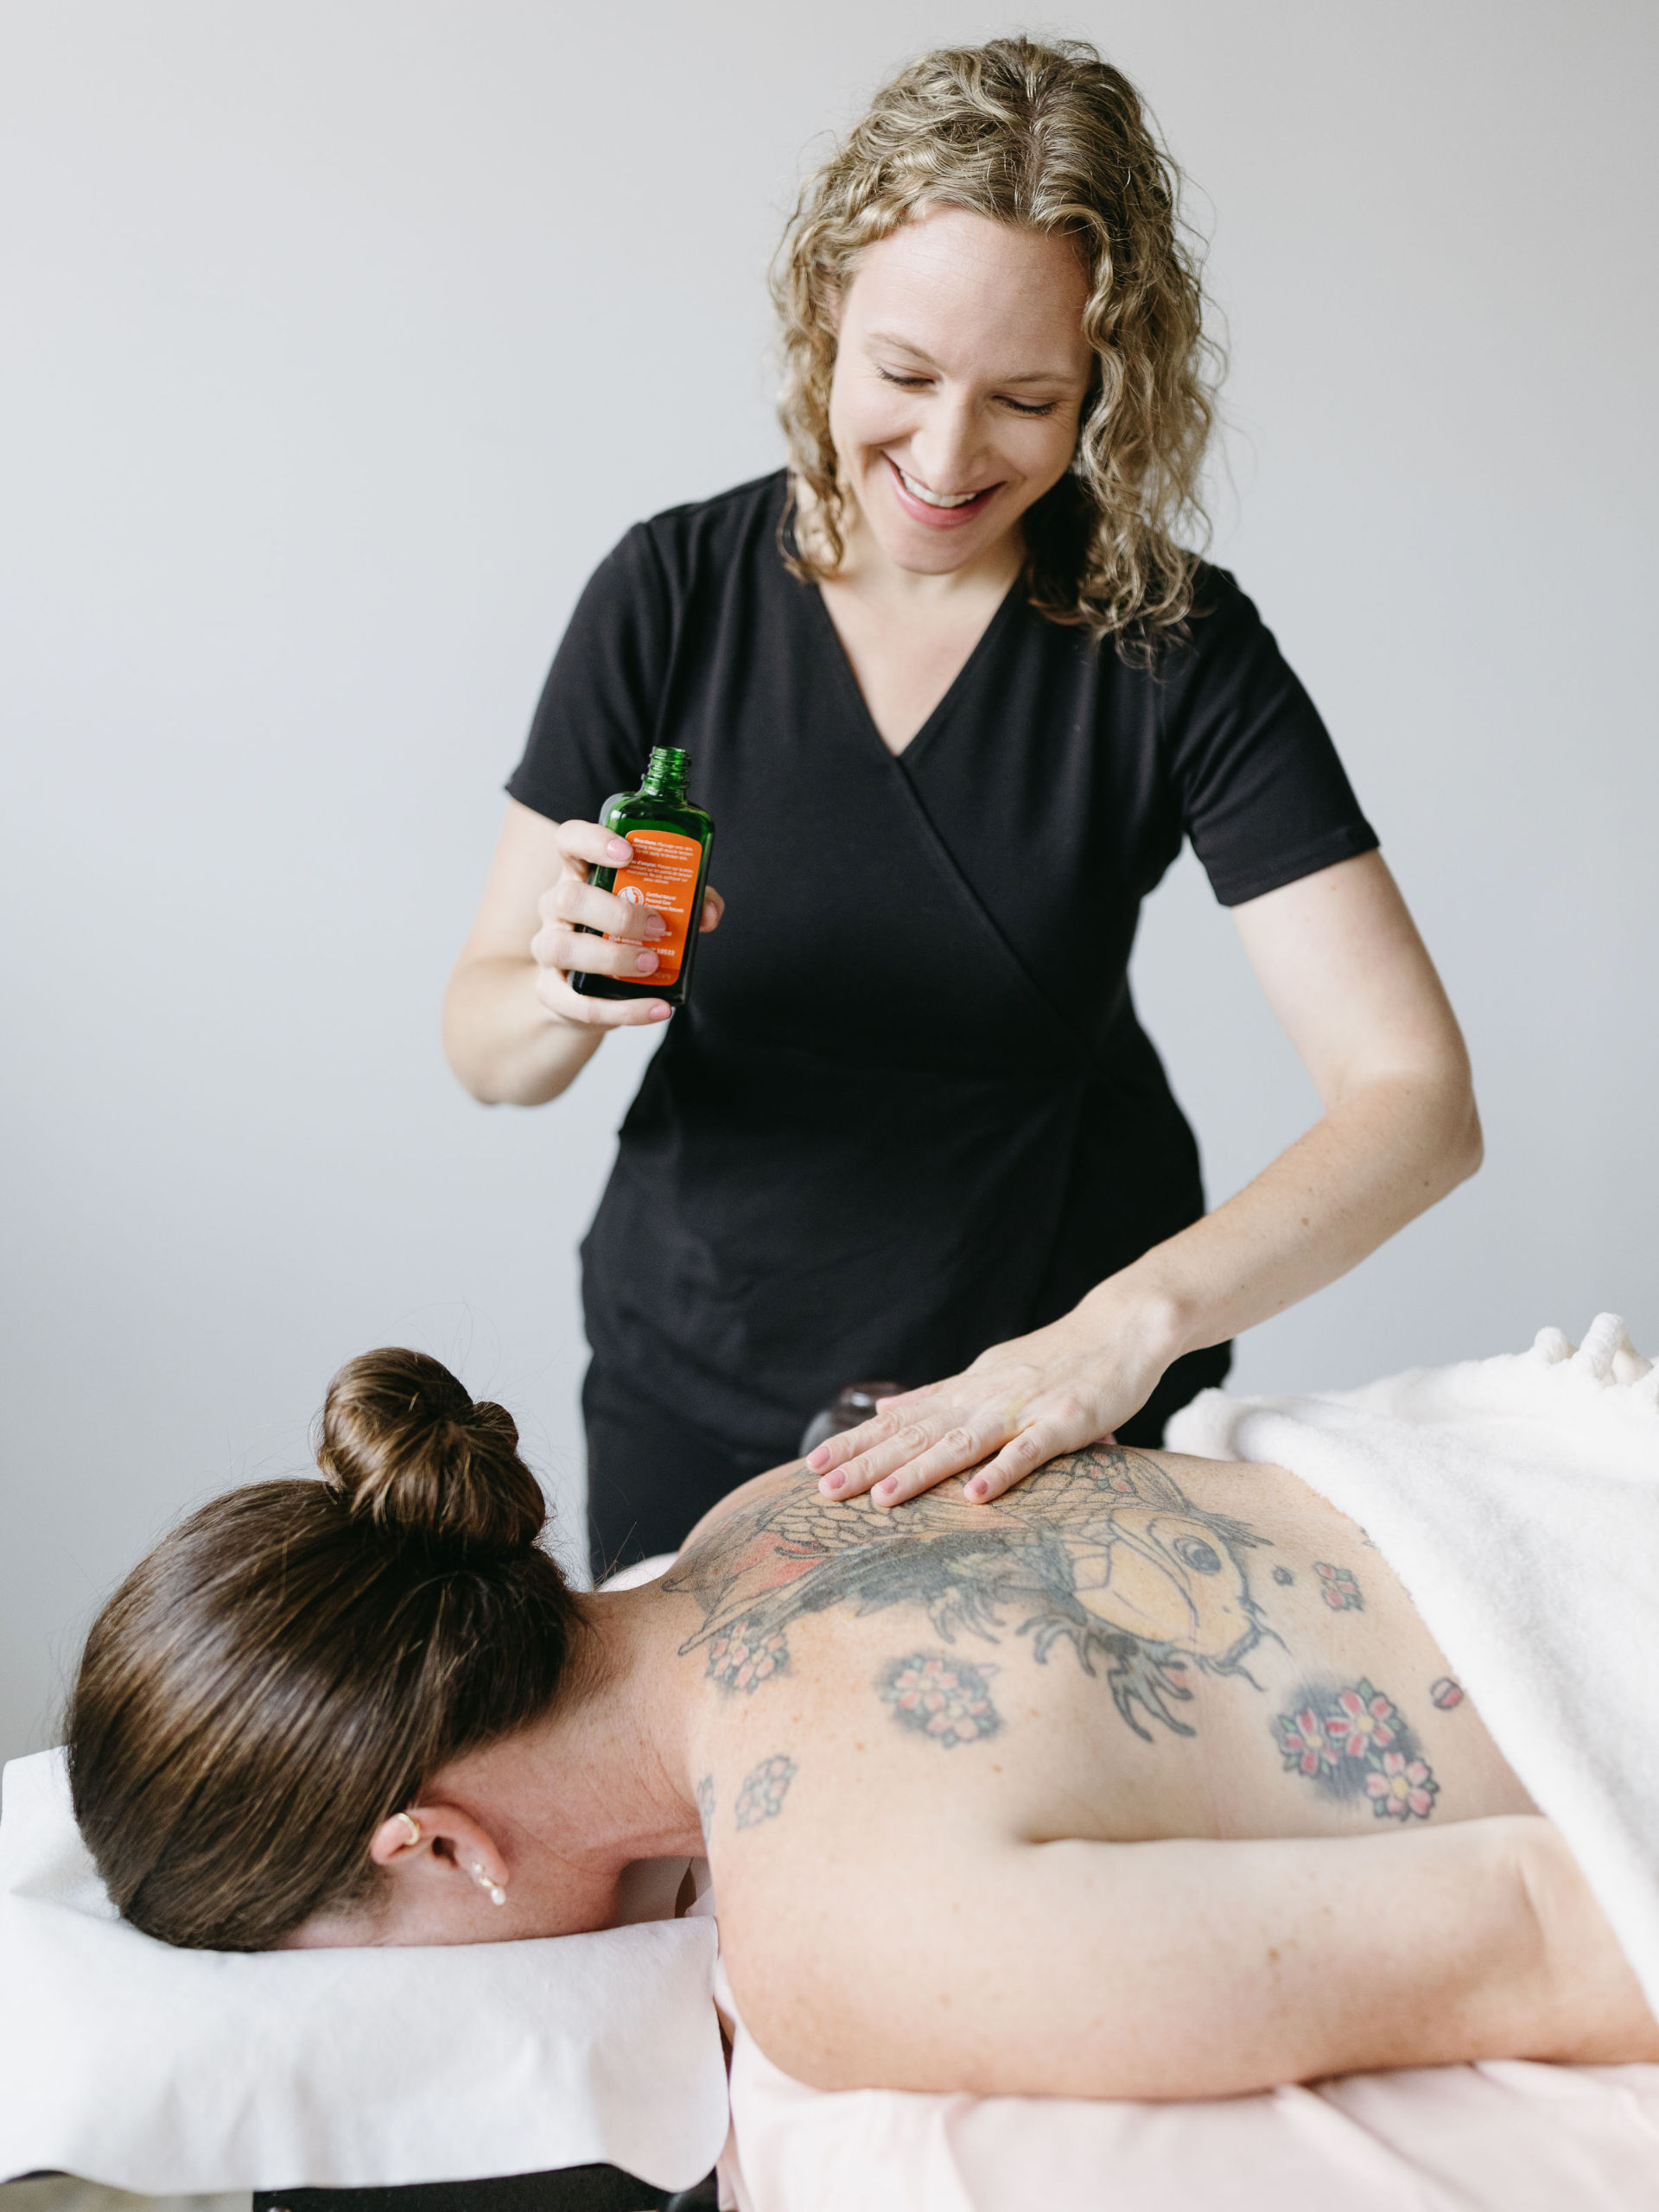 Acupuncture Treatment at Cherry Blossom Healing Arts